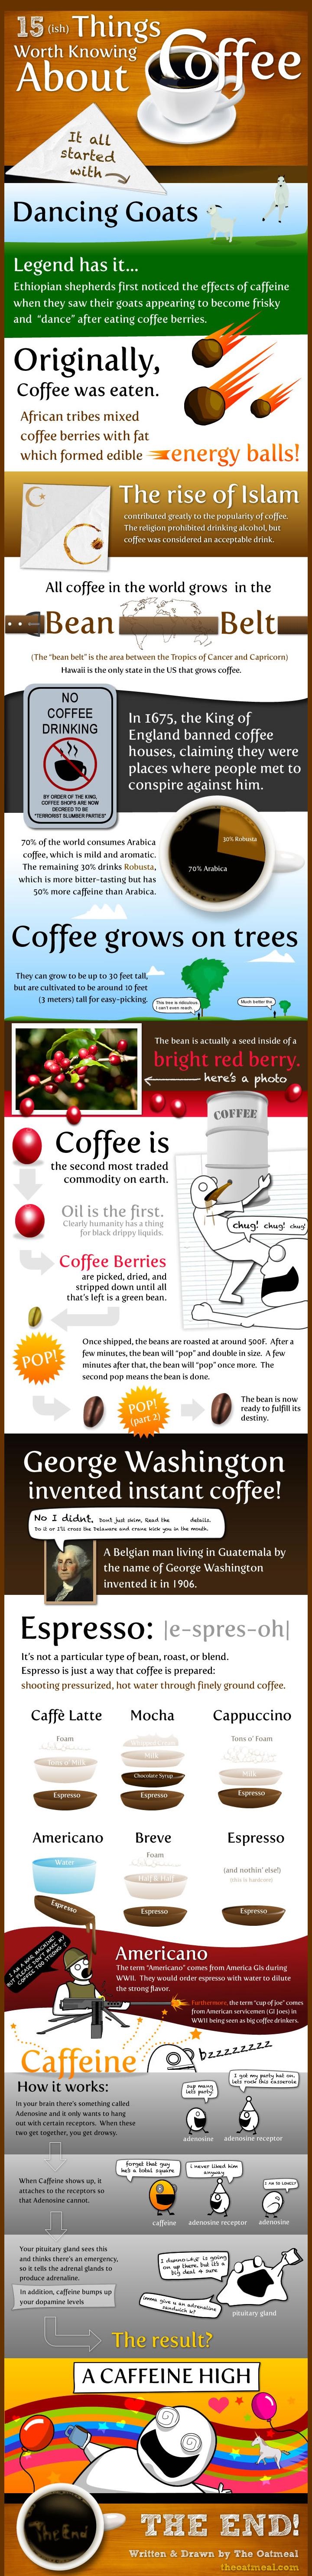 Coffee Info From The Oatmeal